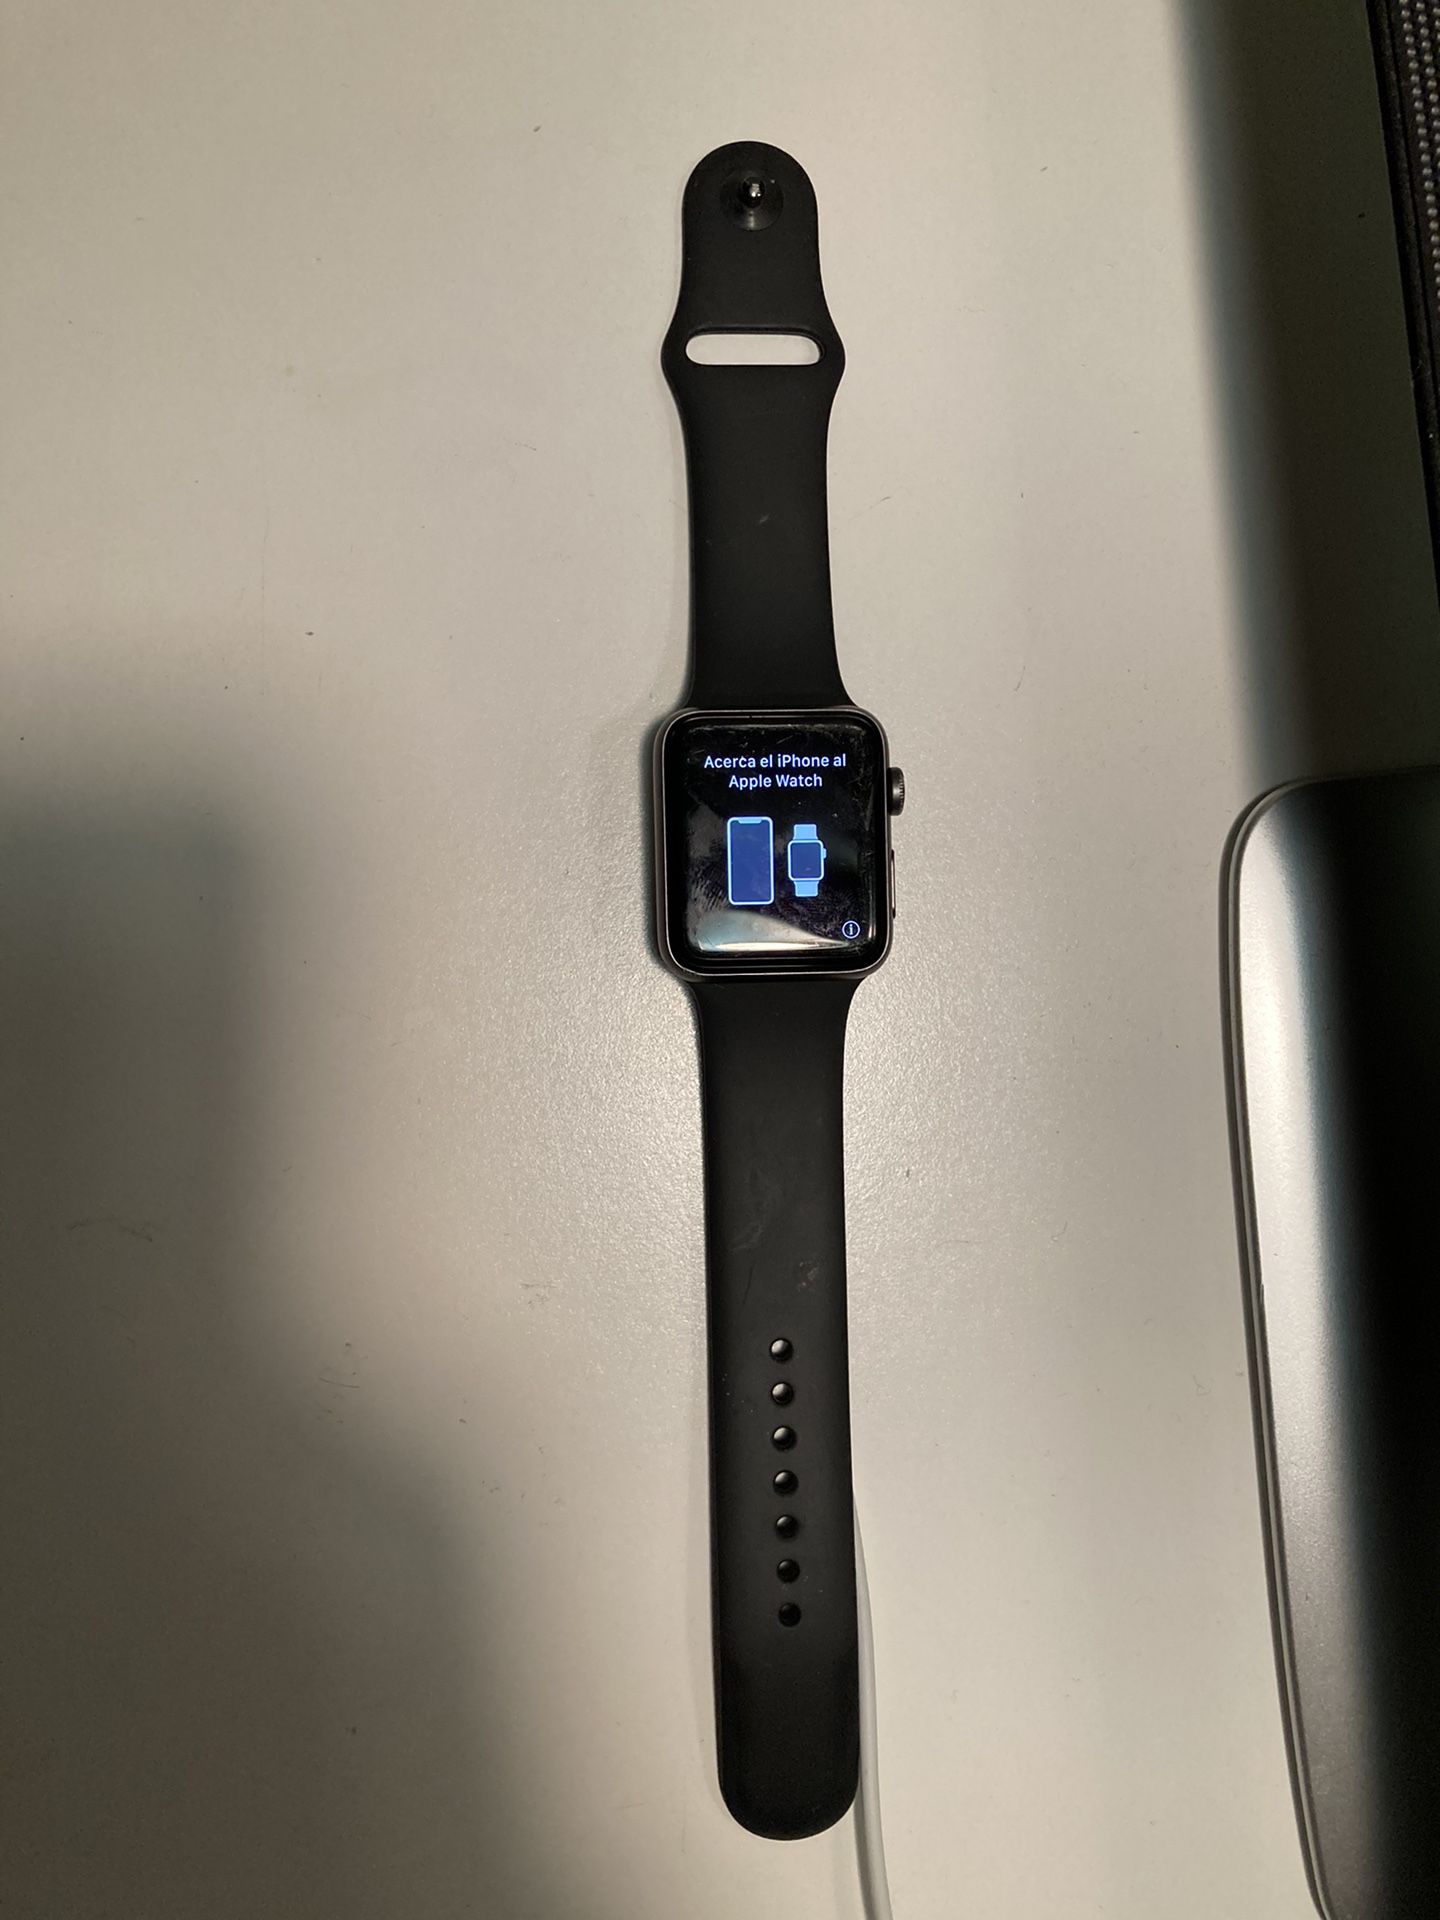 Apple Watch Series 3 Factory Reset (works Perfect)